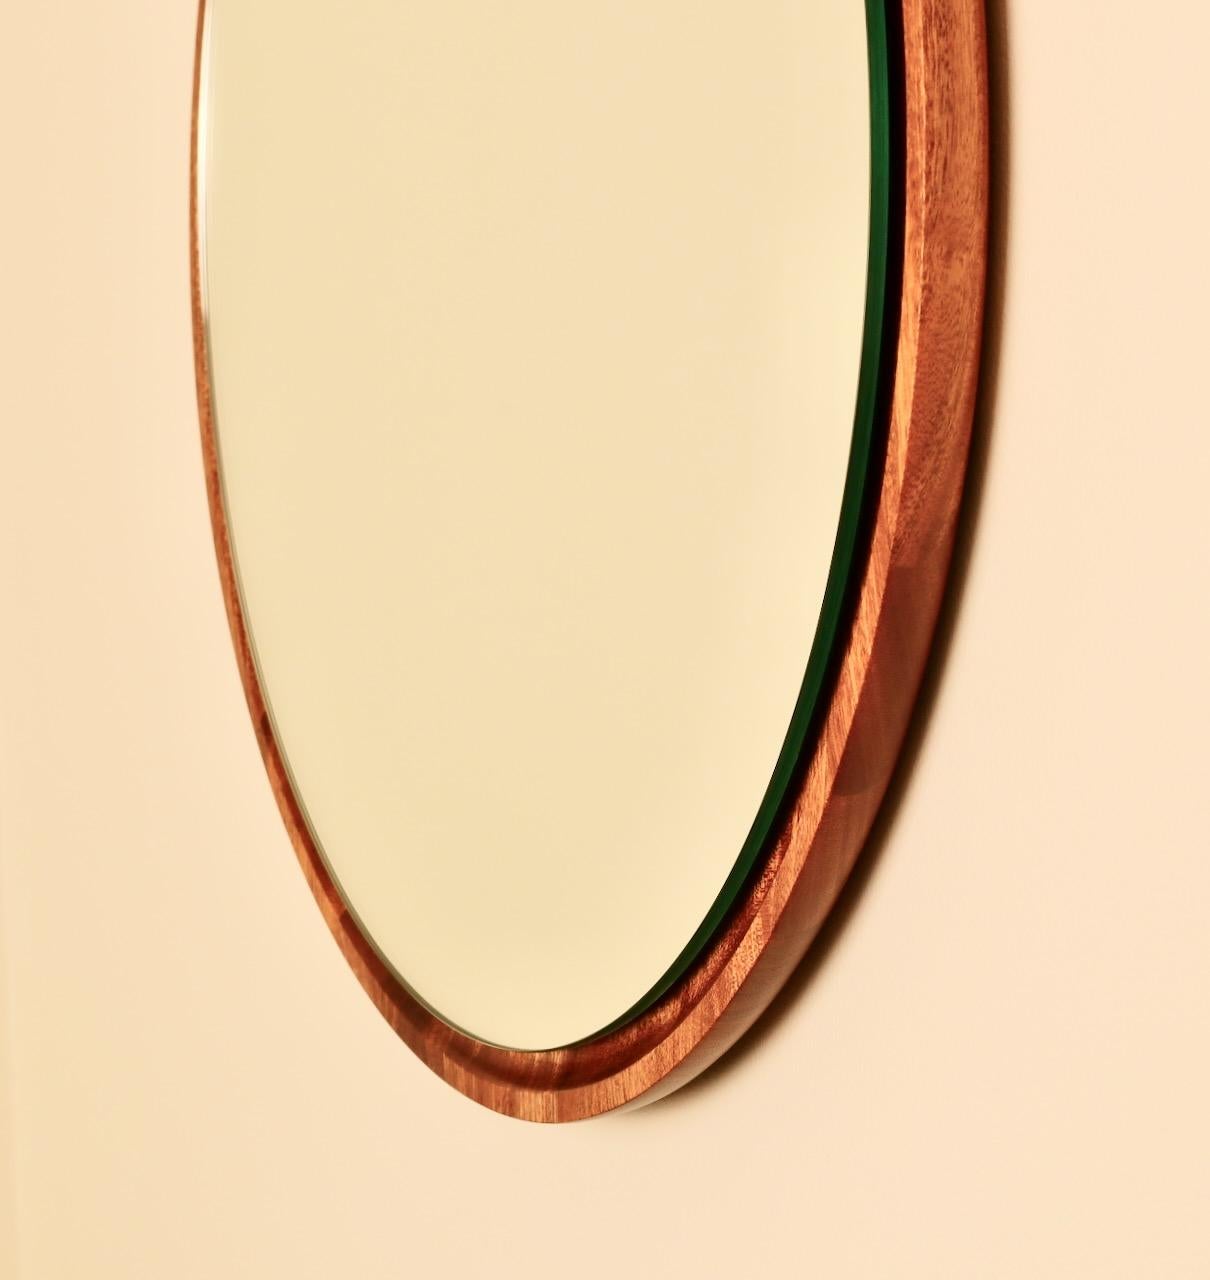 Canadian FLOAT MIRROR in Sapele For Sale